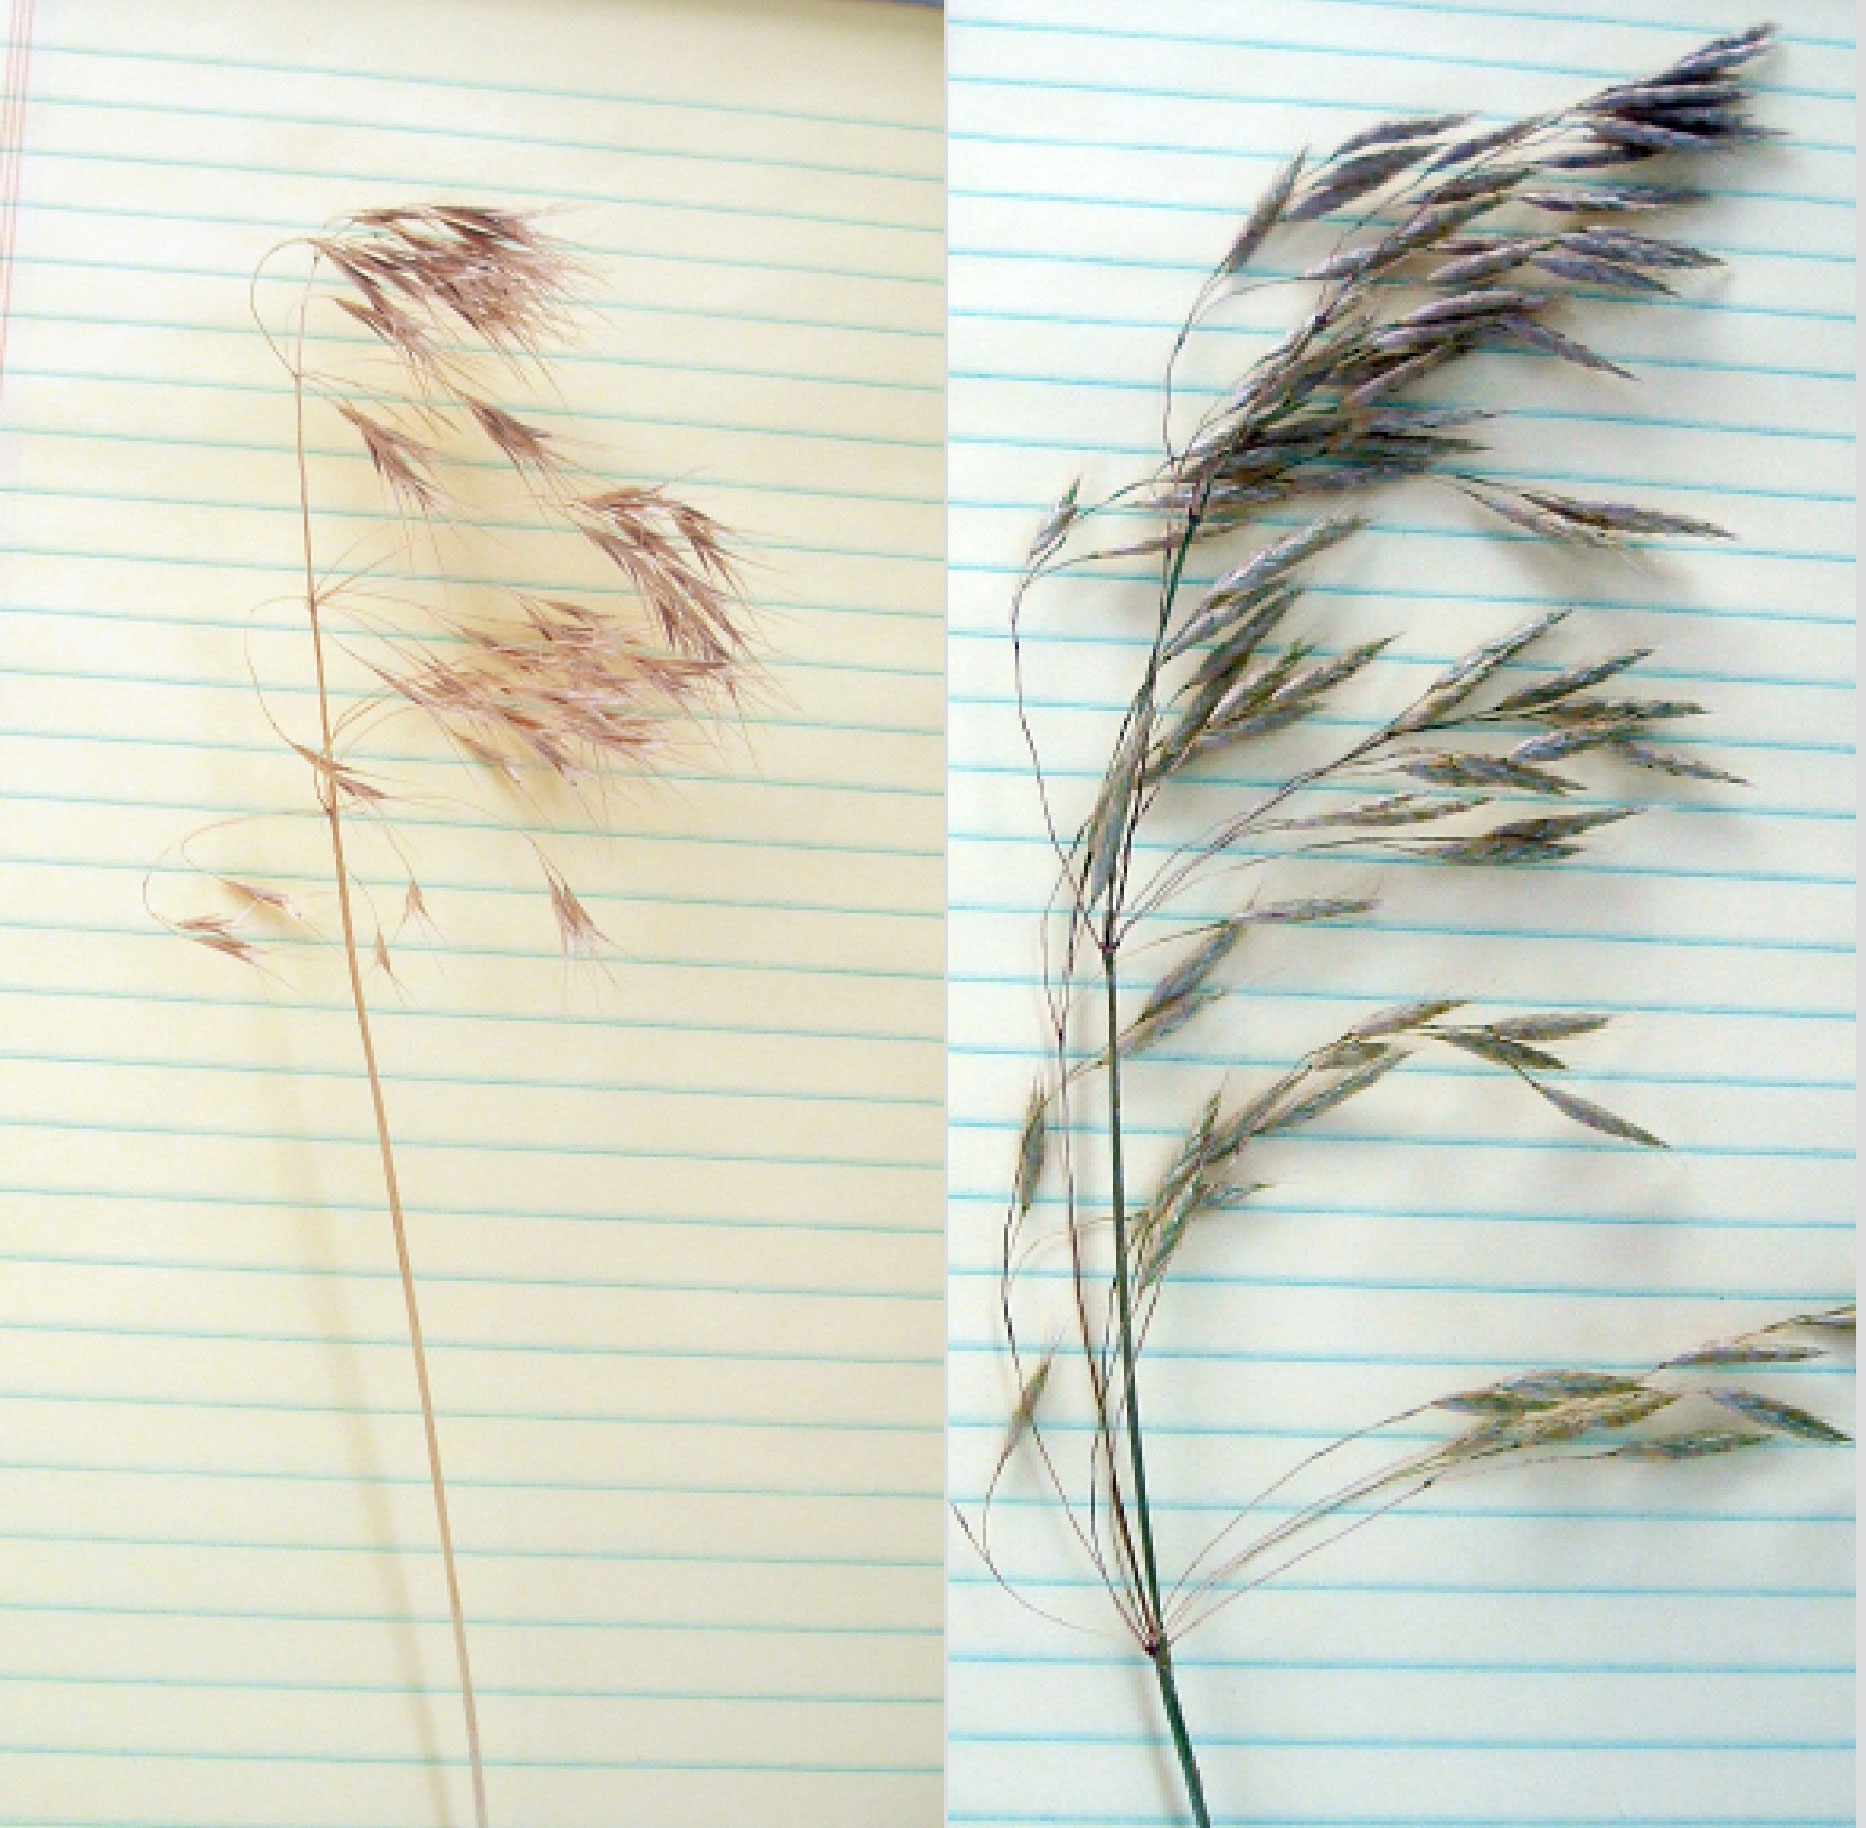 How to identify the difference between Japanese and downy brome